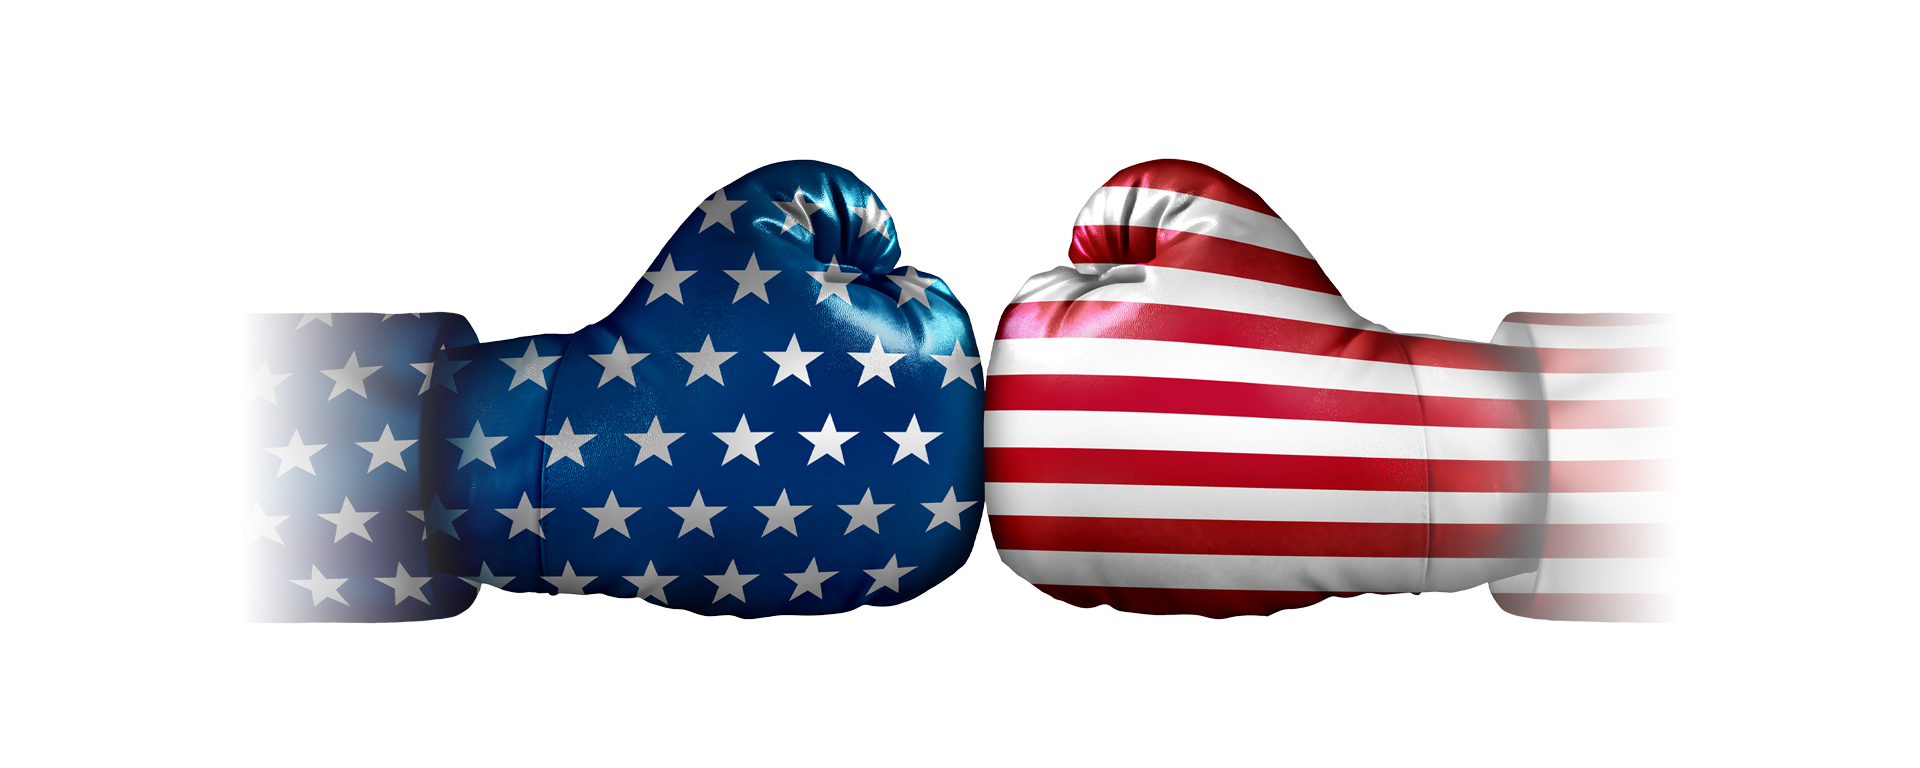 Boxing gloves with an American flag pattern.